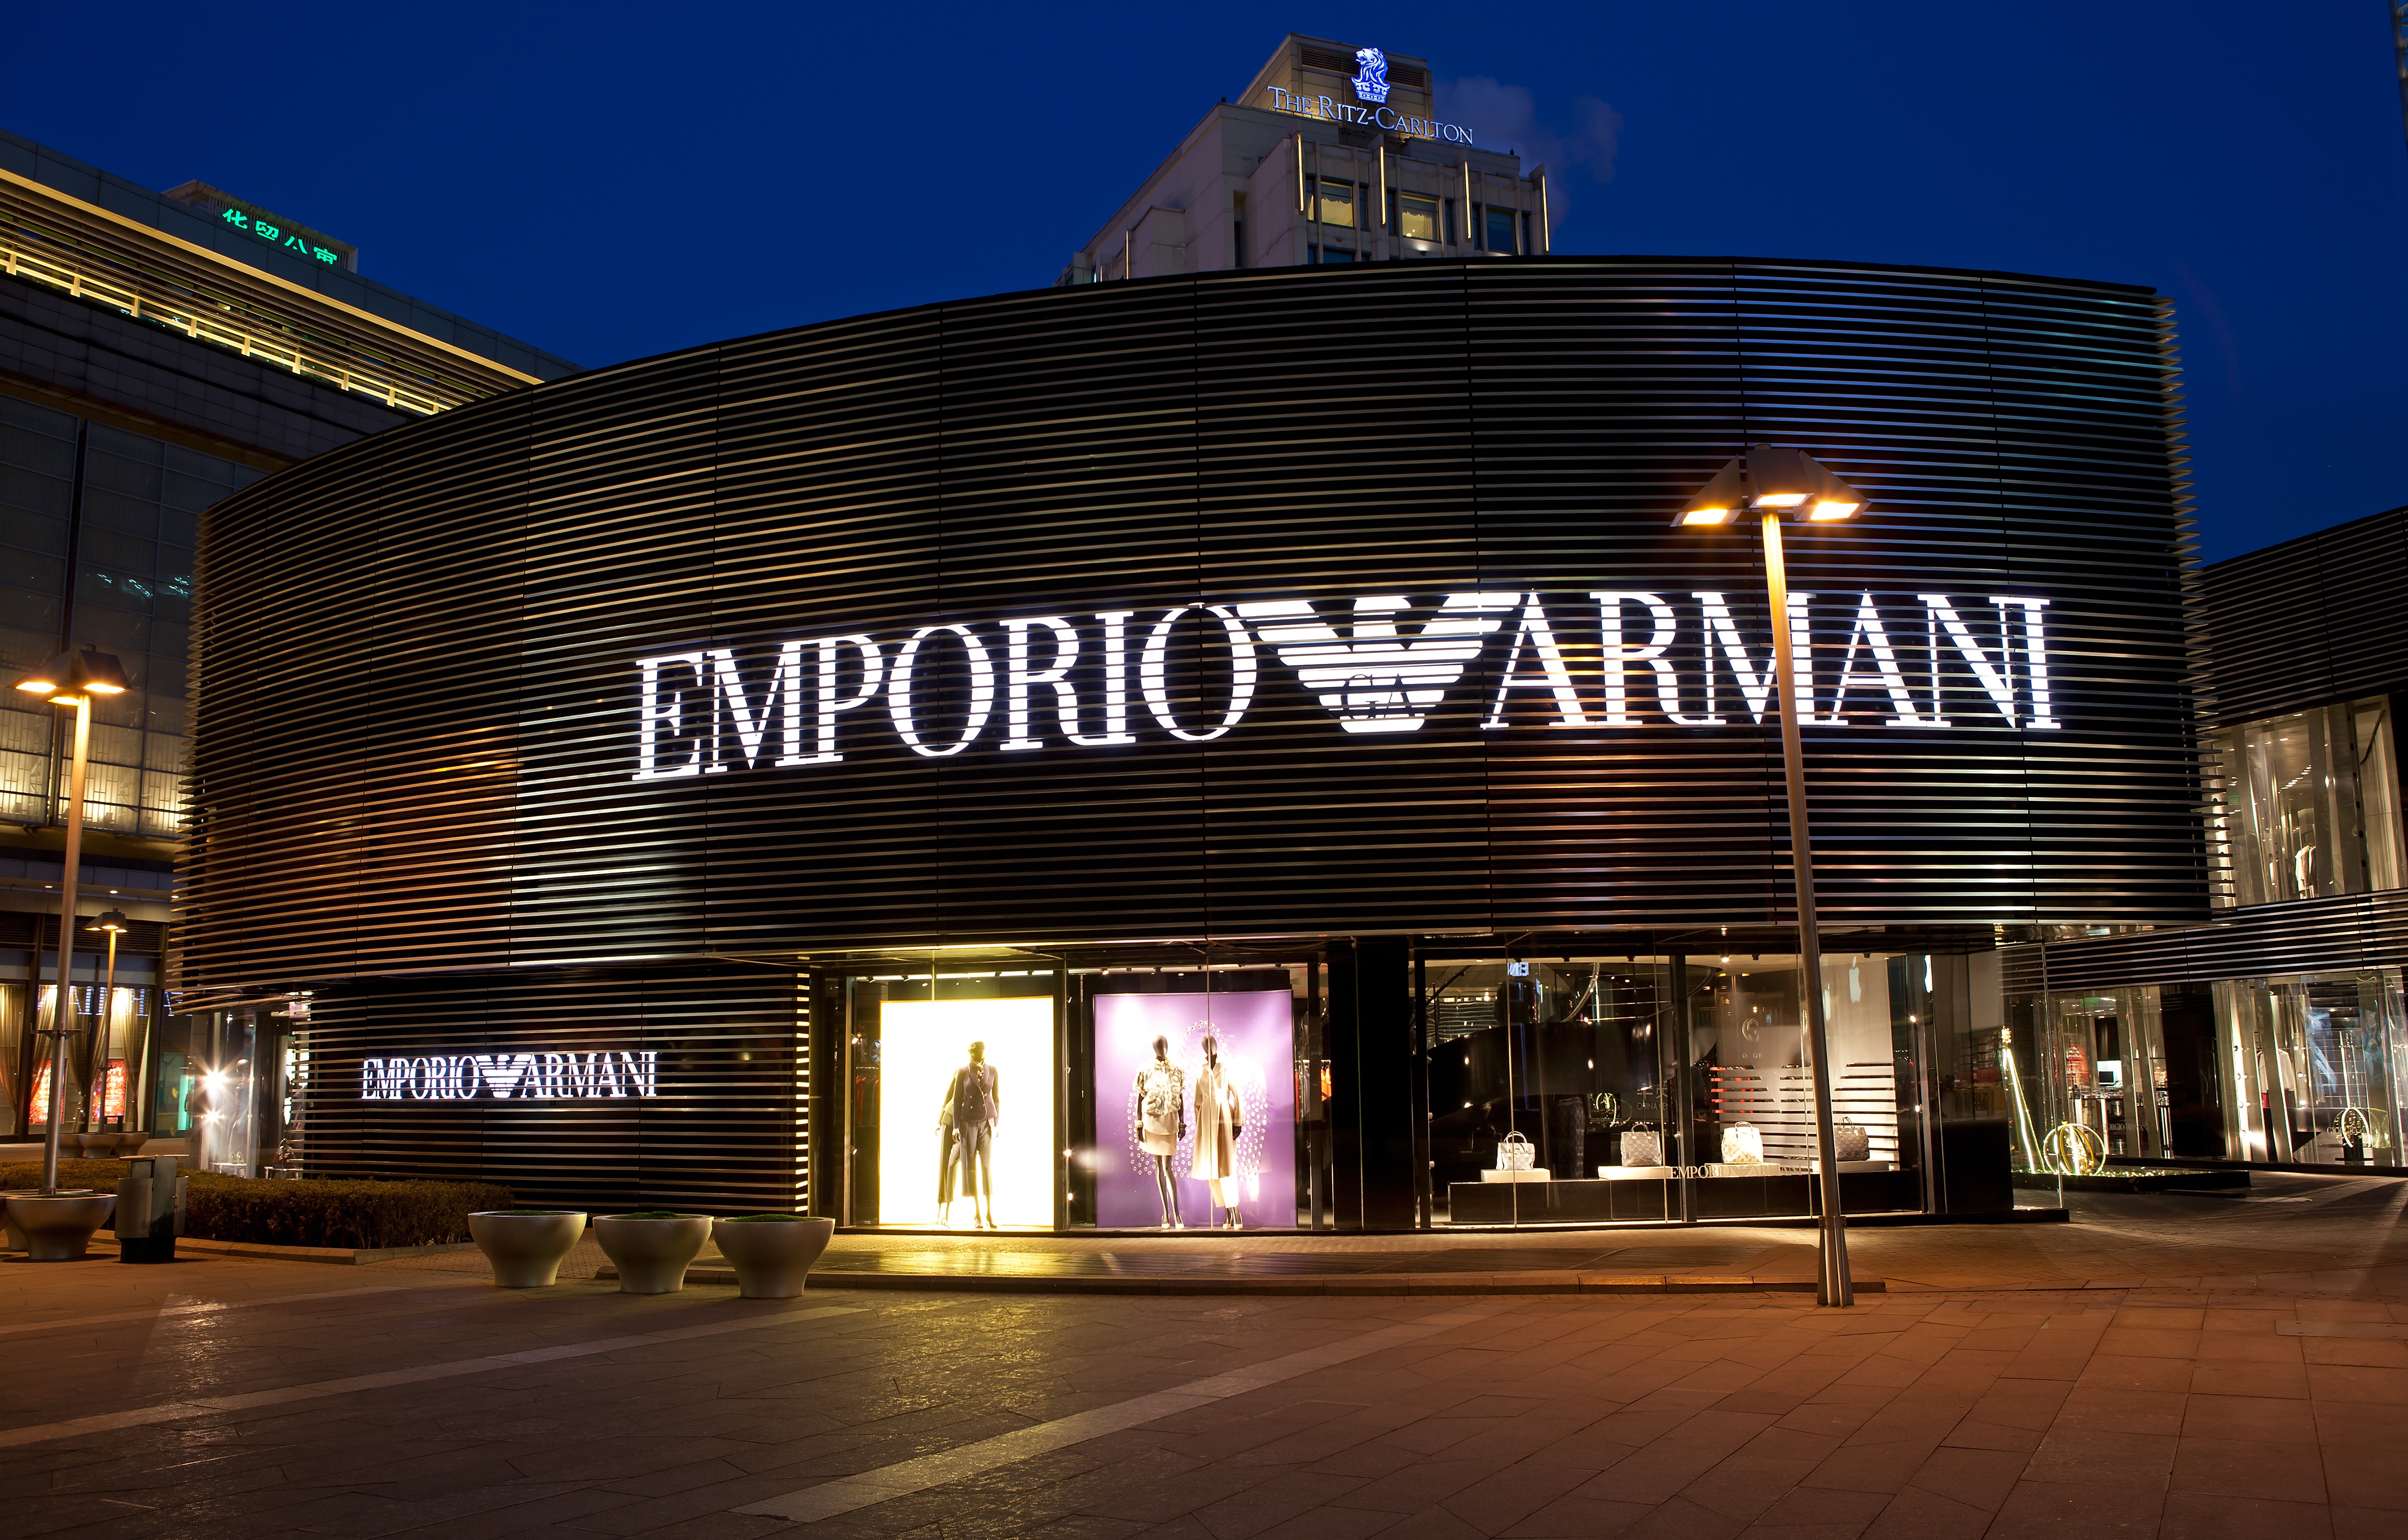 Emporio Armani named Chinese actress Zhou Yutong as its new ambassador for its women’s watch and accessories collections in China. Photo: Shutterstock